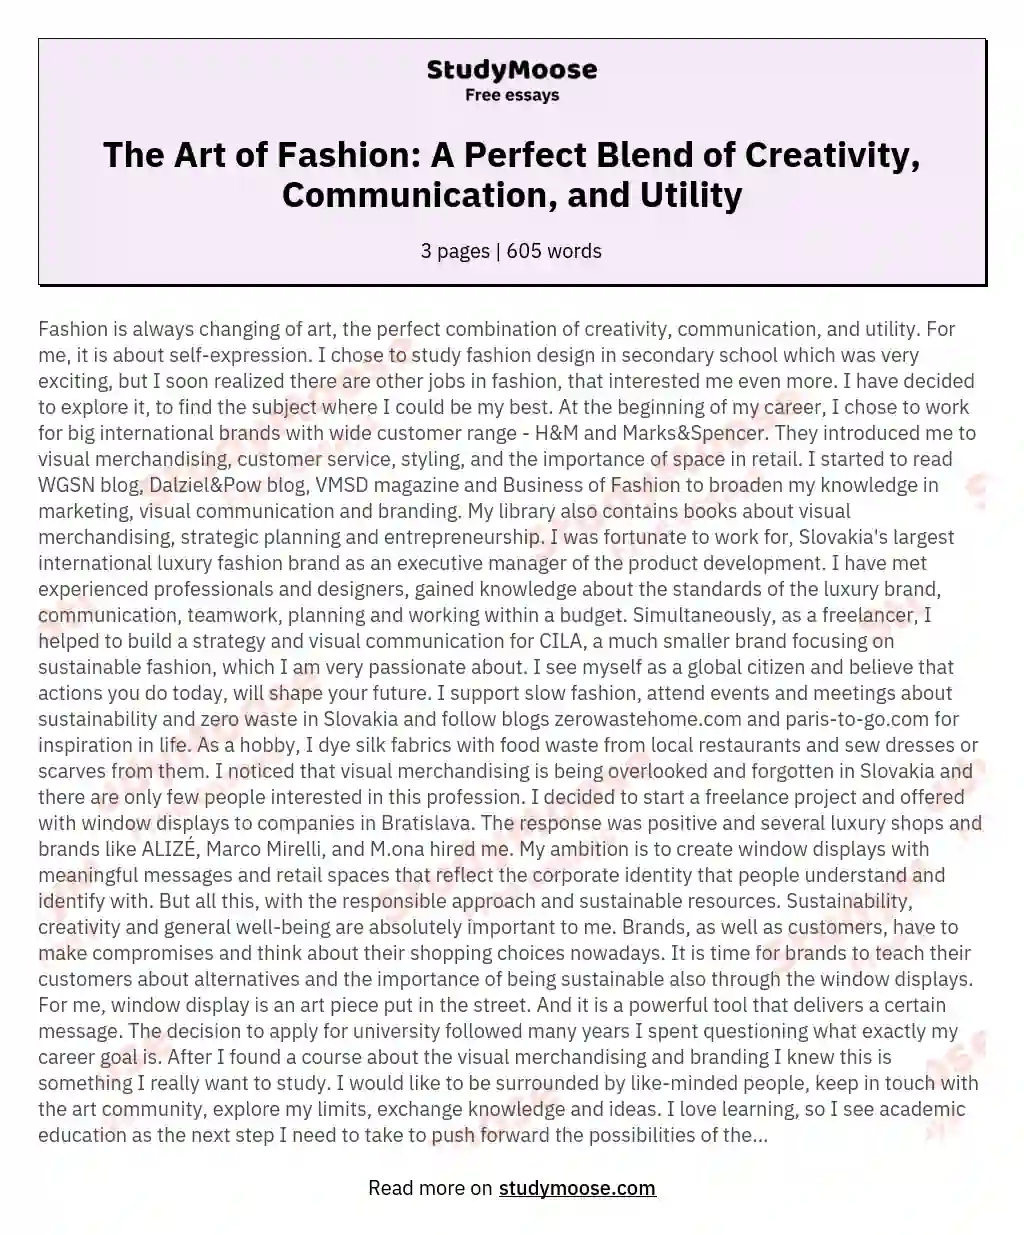 The Art of Fashion: A Perfect Blend of Creativity, Communication, and Utility essay